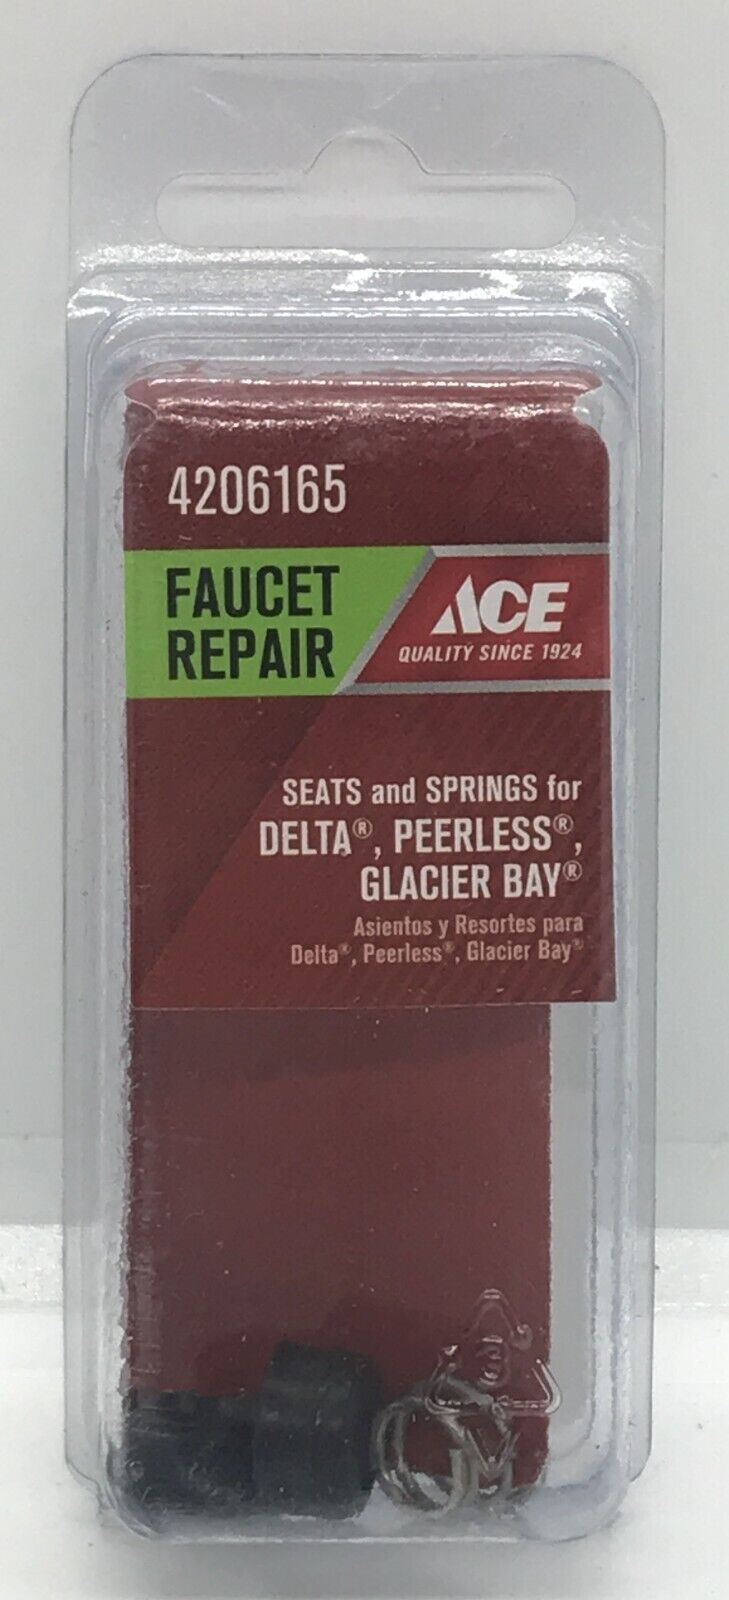 Primary image for ACE Faucet Repair Seats and Springs for Delta Peerless Glacier Bay #4206165